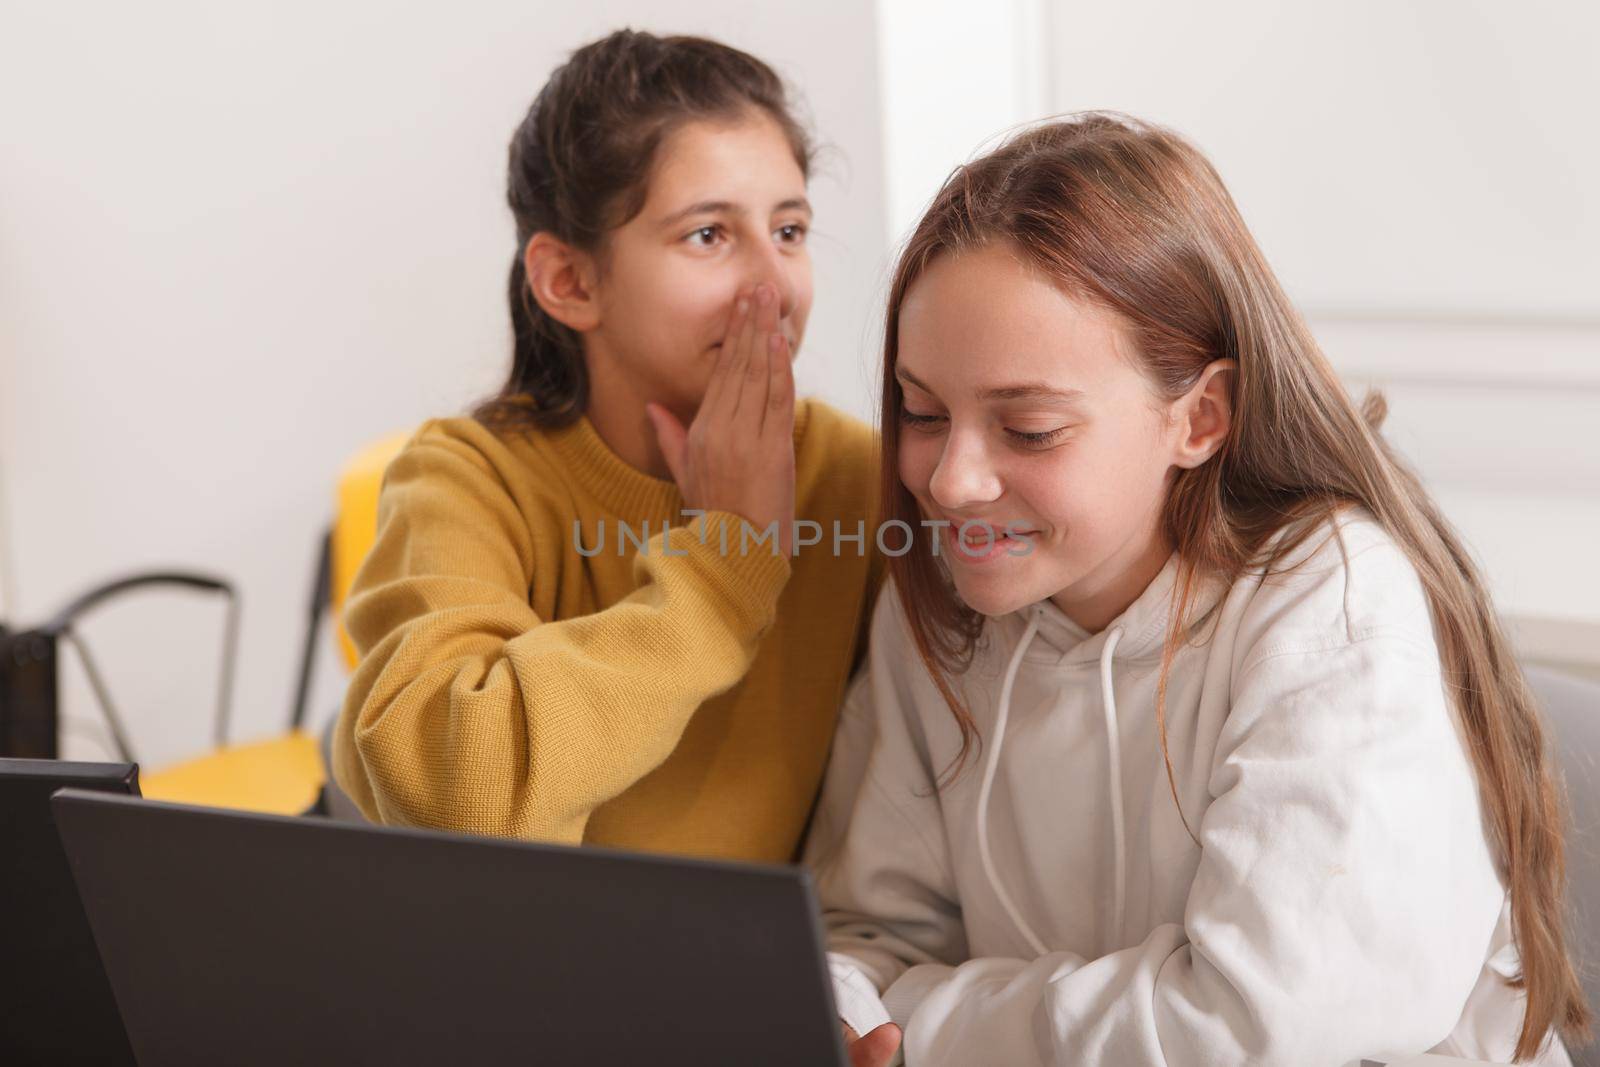 Teenage schoolgirls gossiping and whispering, studying together at school, using computer